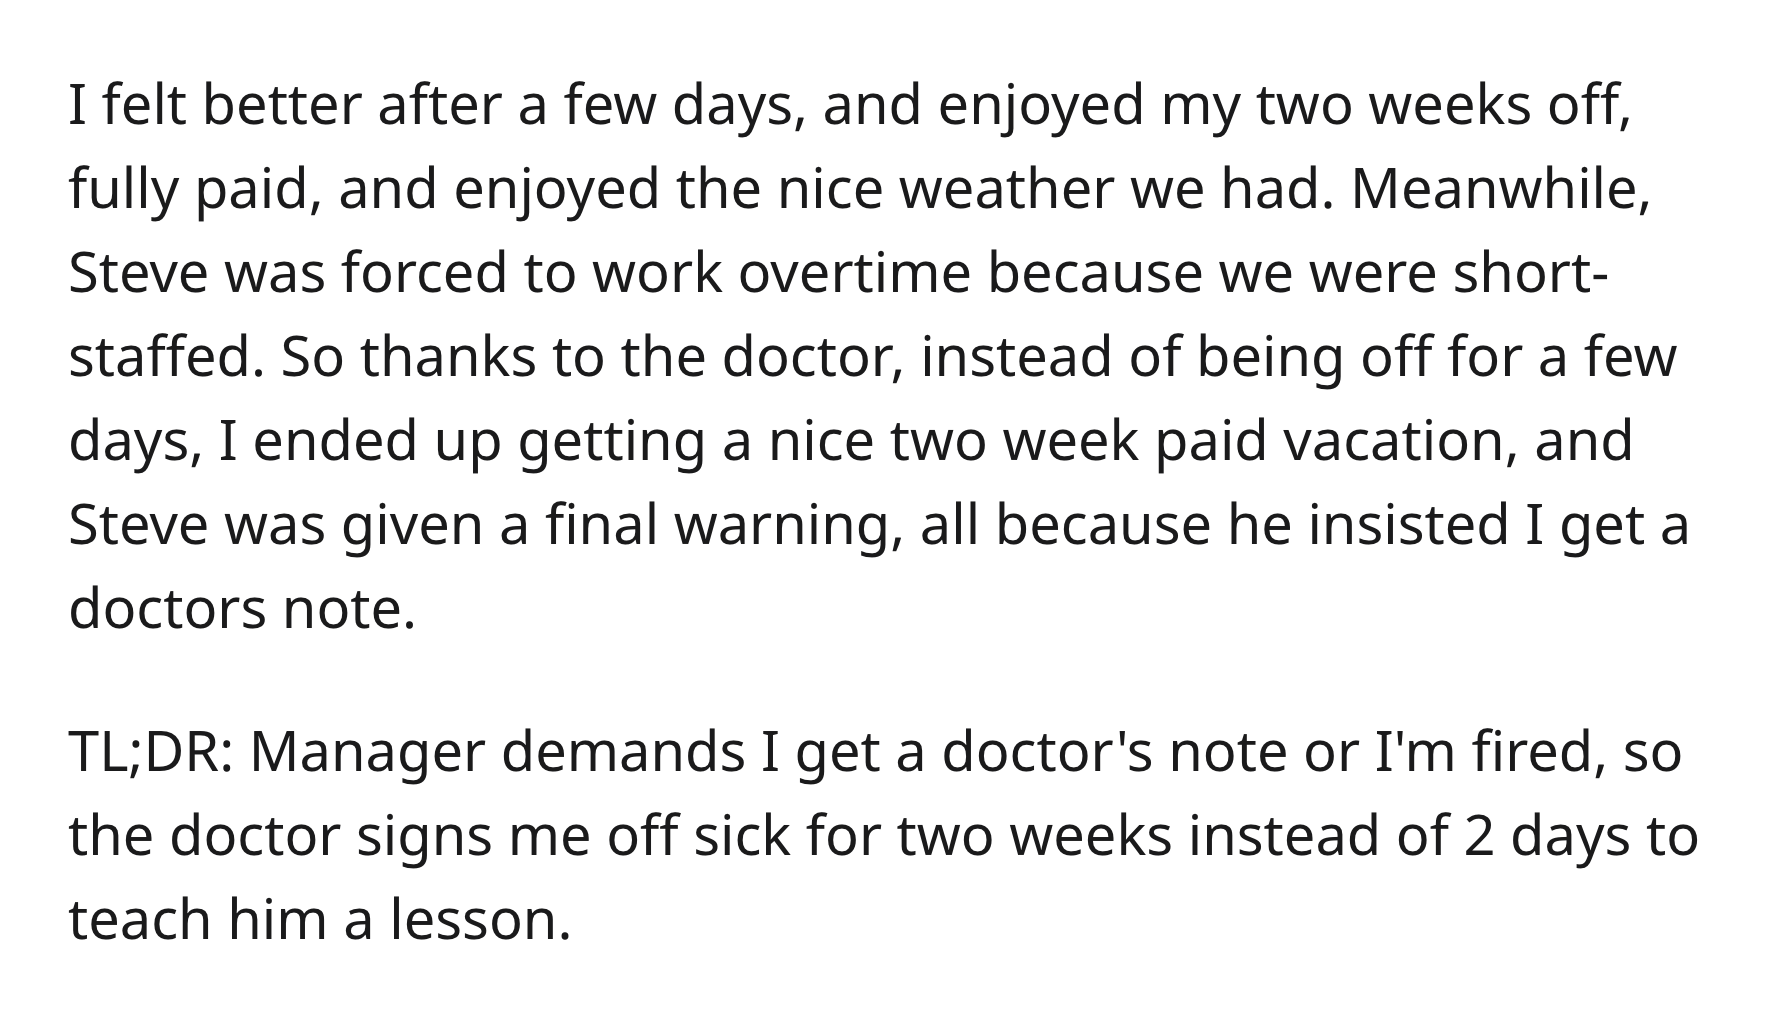 Boss Illegally Demands Doctor’s Note, So Doctor Recommends 2 Weeks Off - angle - I felt better after a few days, and enjoyed my two weeks off, fully paid, and enjoyed the nice weather we had. Meanwhile, Steve was forced to work overtime because we were sh